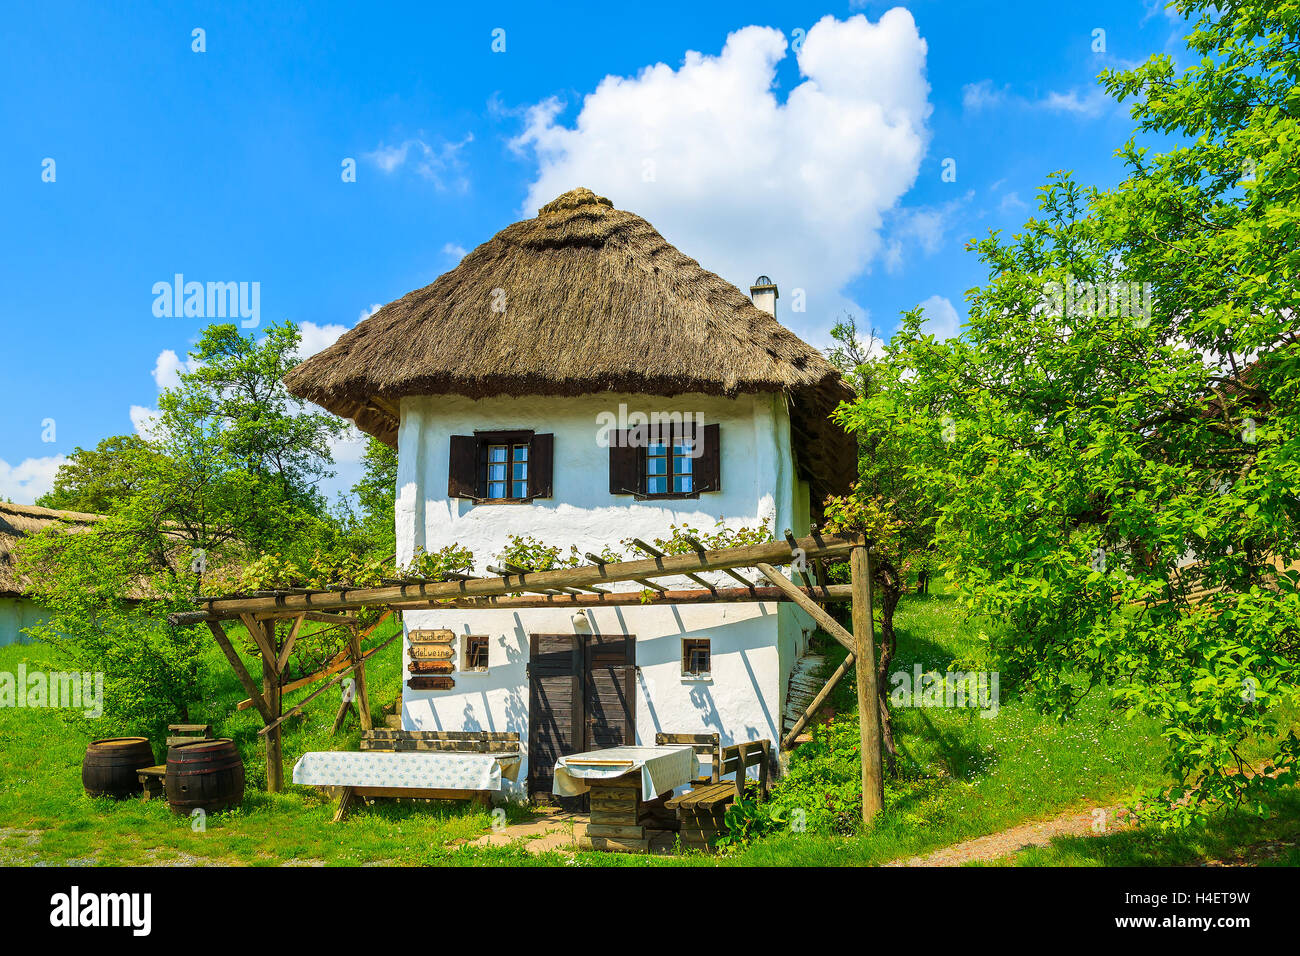 BURGENLAND, AUSTRIA - APR 30, 2014: rustic cottage in countryside landscape of Burgenland during spring time. This region of Austria is famous for wine making and is most sunny in whole Austria. Stock Photo